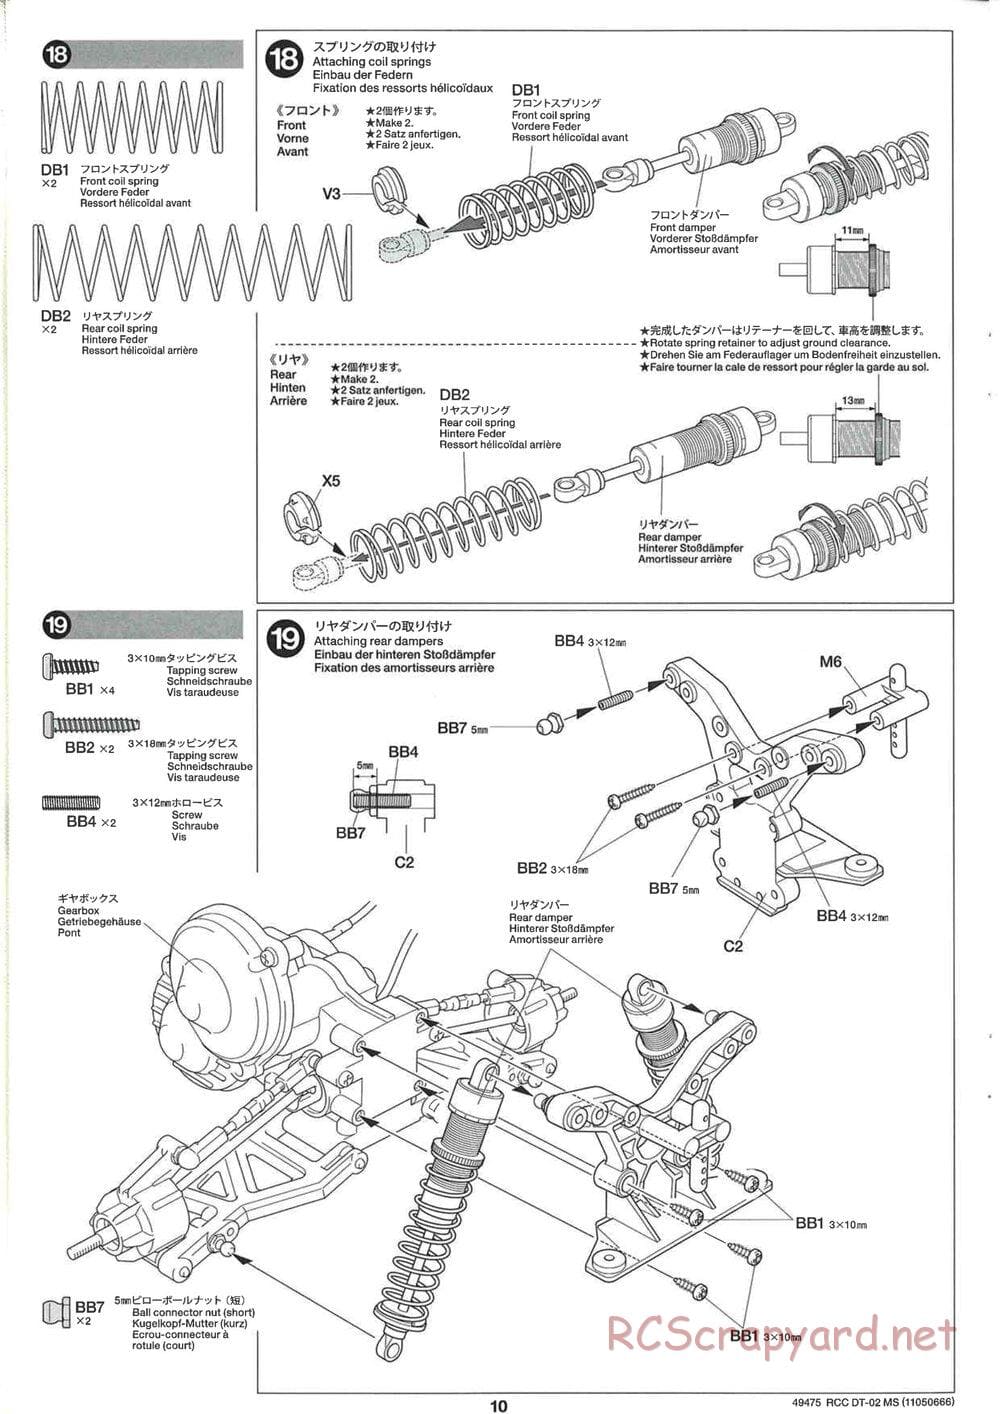 Tamiya - DT-02 MS Chassis - Manual - Page 11